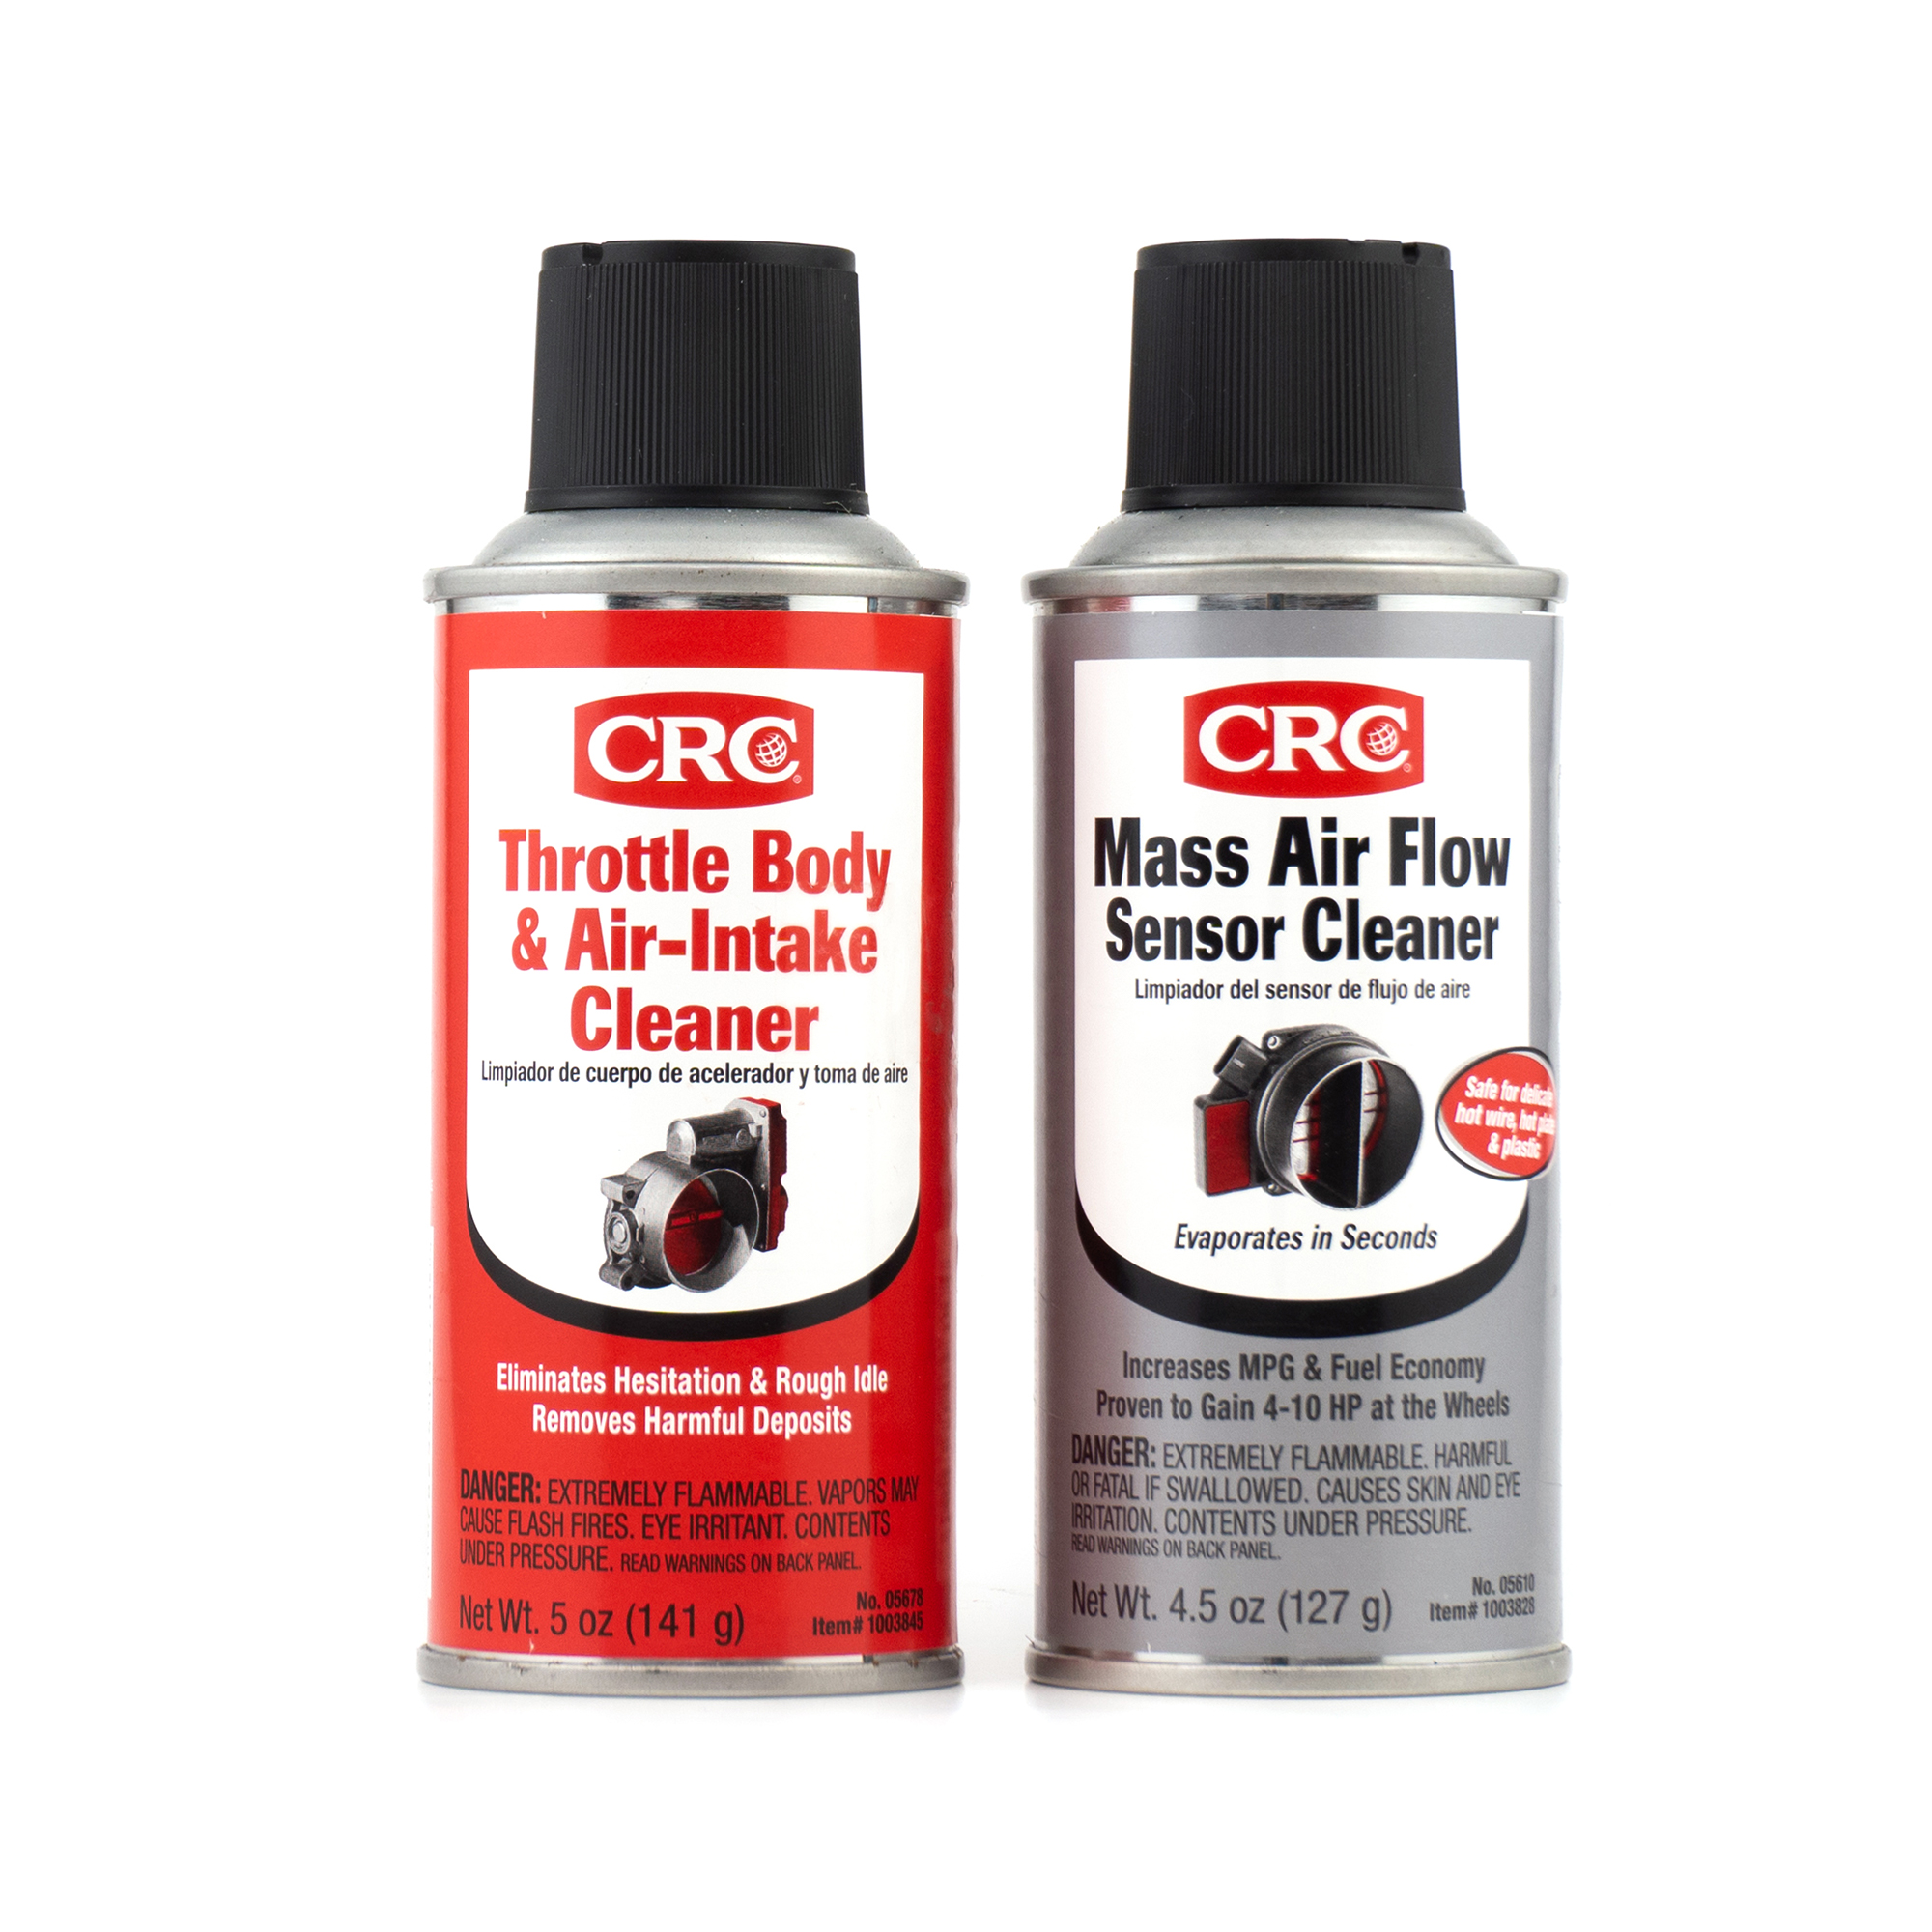 CRC Mass Air Flow & Throttle Body Single-Use Cleaner Twin Pack Kit - image 1 of 10